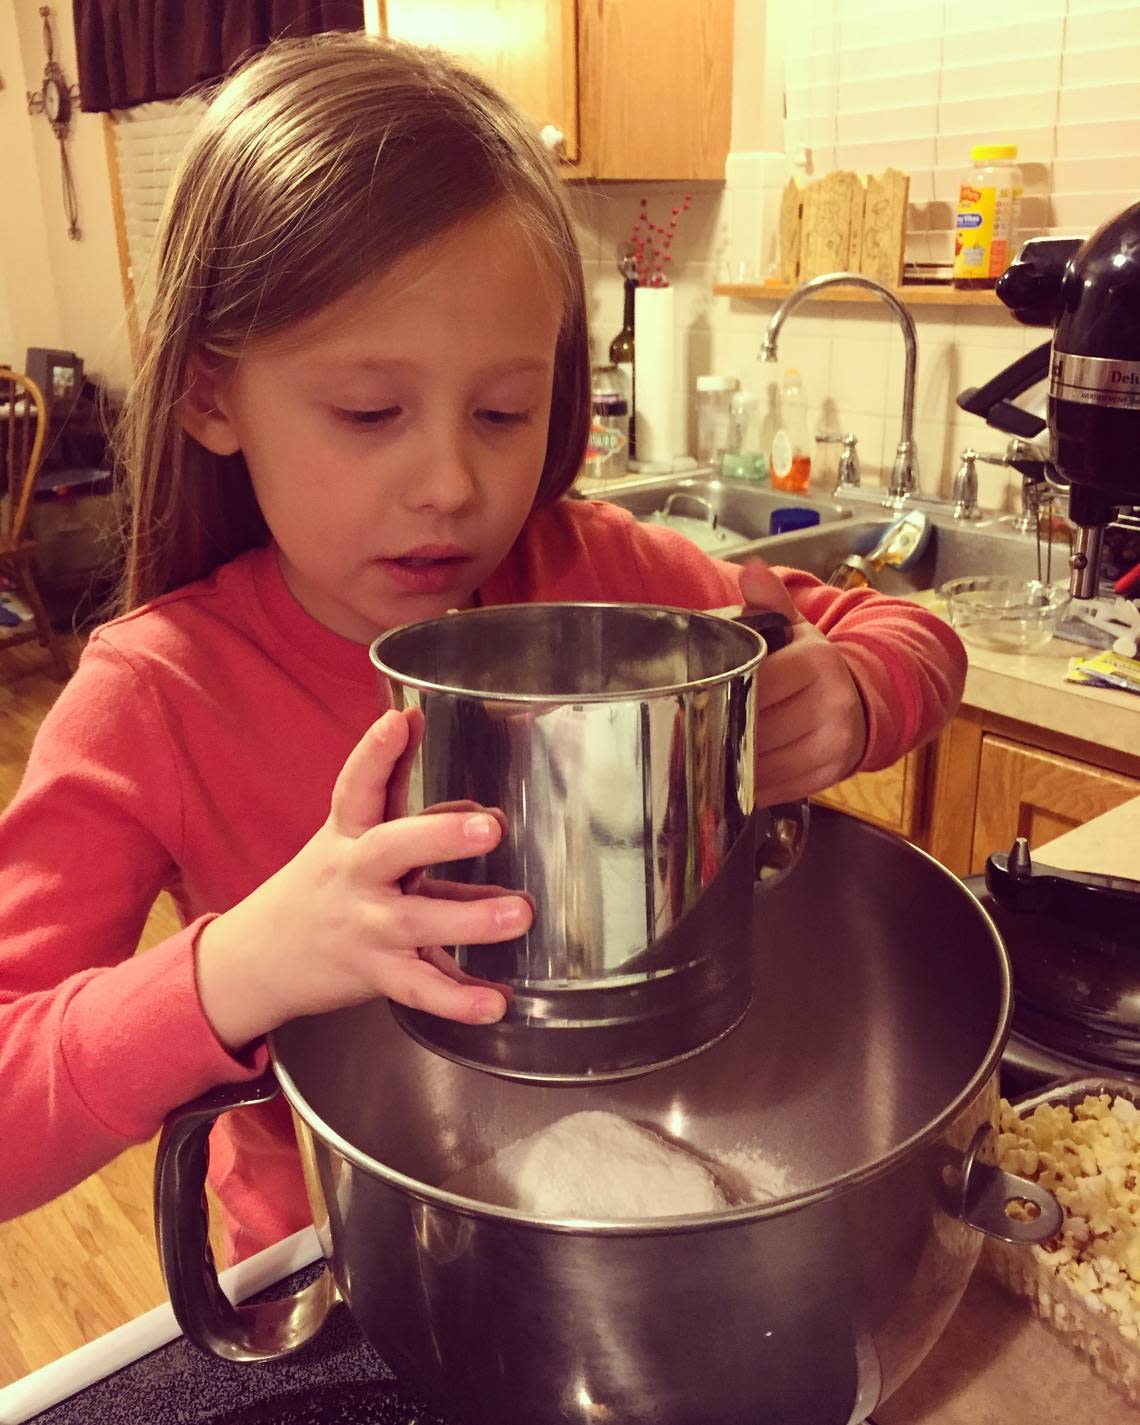 Lillian Grover is now 13 and less interested in povitica making. But when she was little, she loved to help her mom, Katie, with the annual bake. Katie Grover/Courtesy